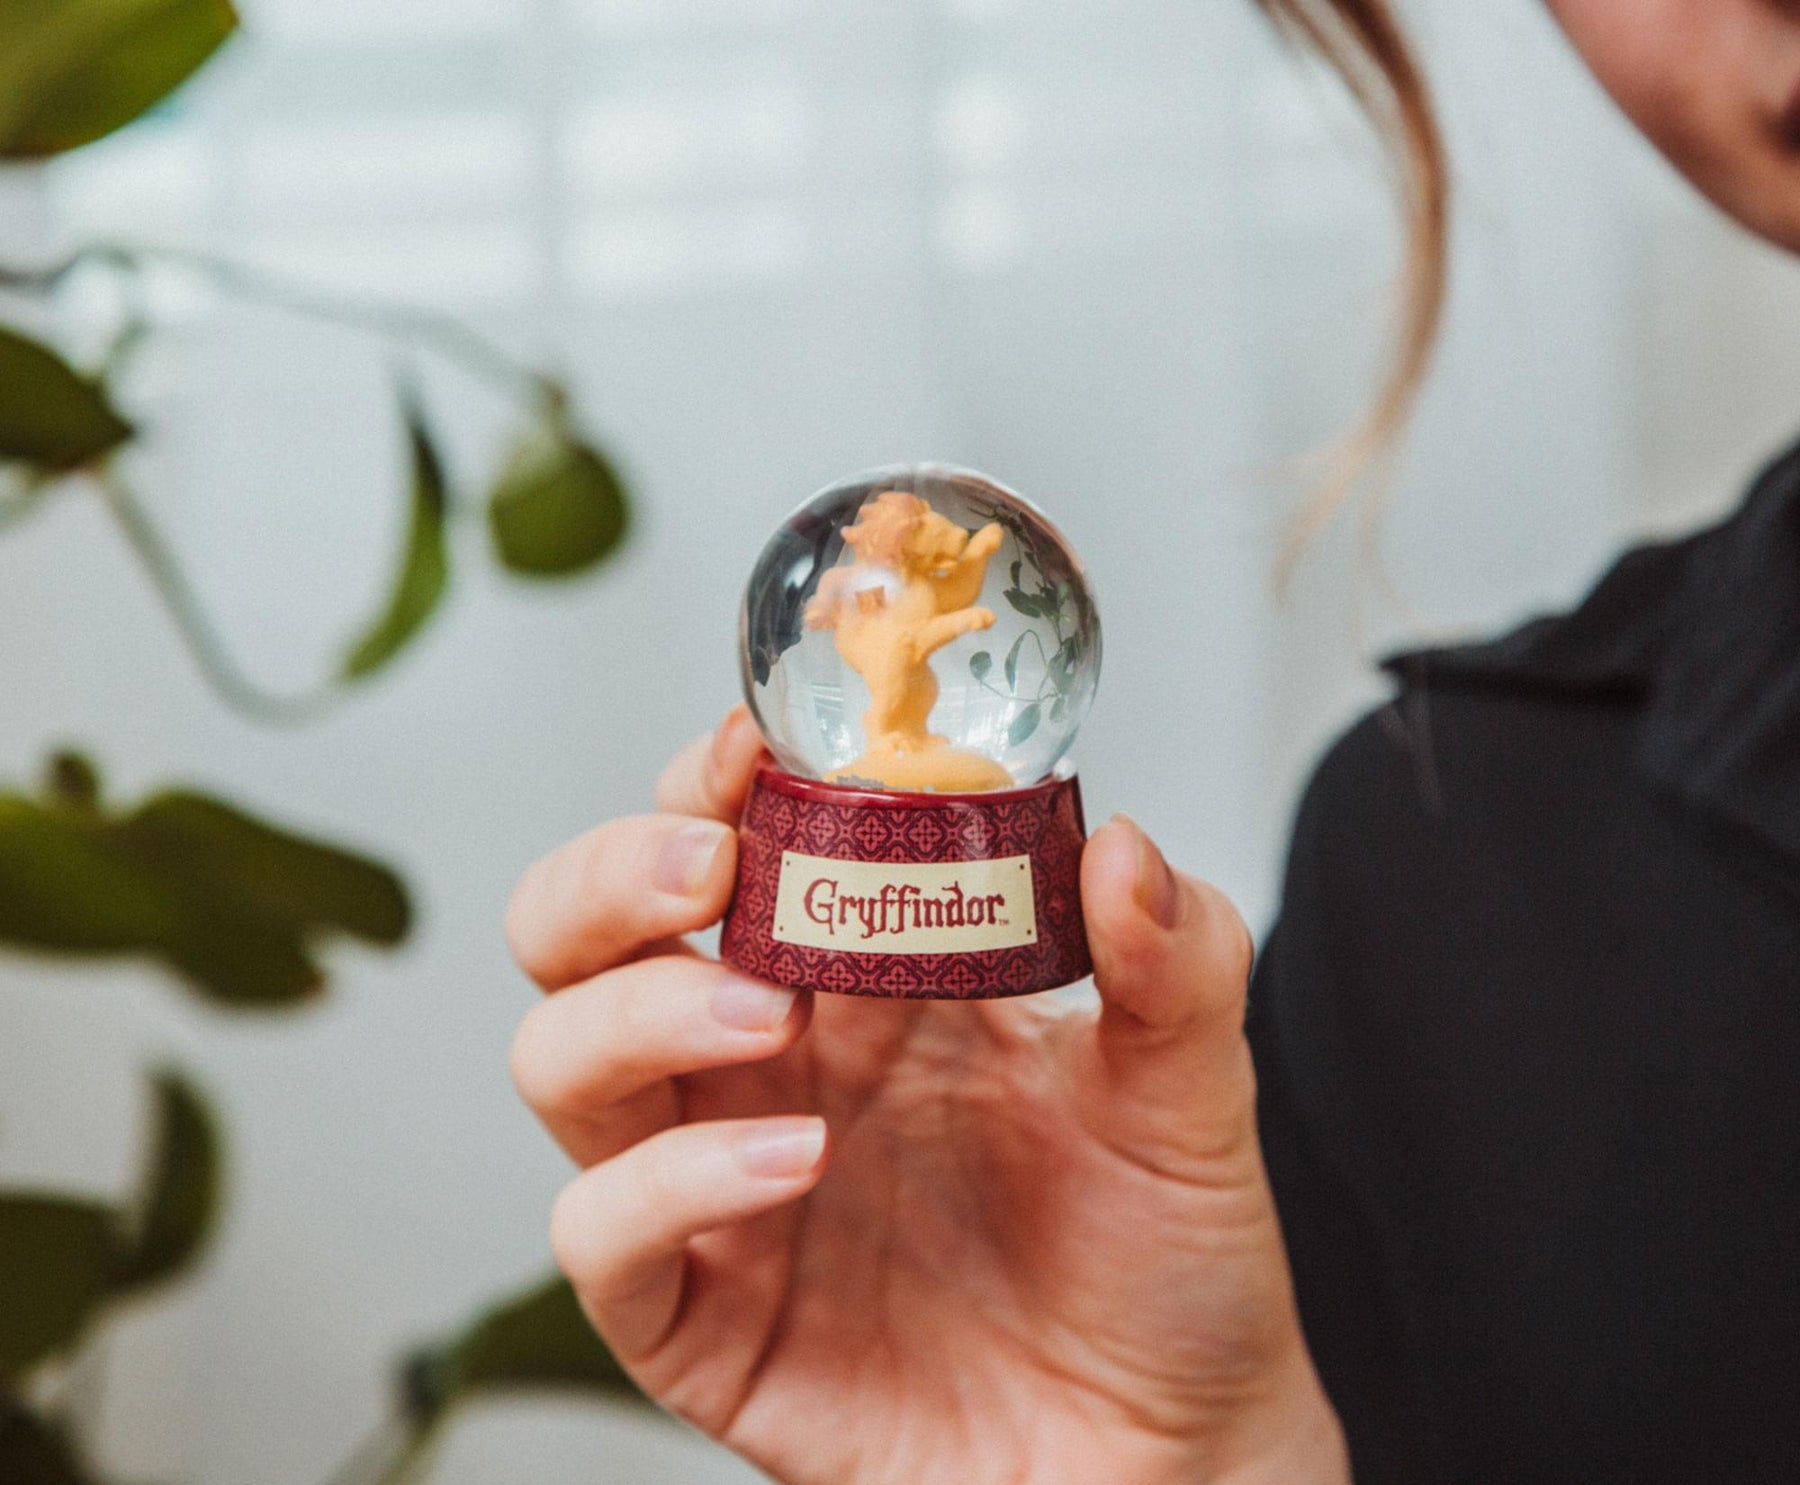 Harry Potter House Gryffindor Collectible Snow Globe | 3 Inches Tall